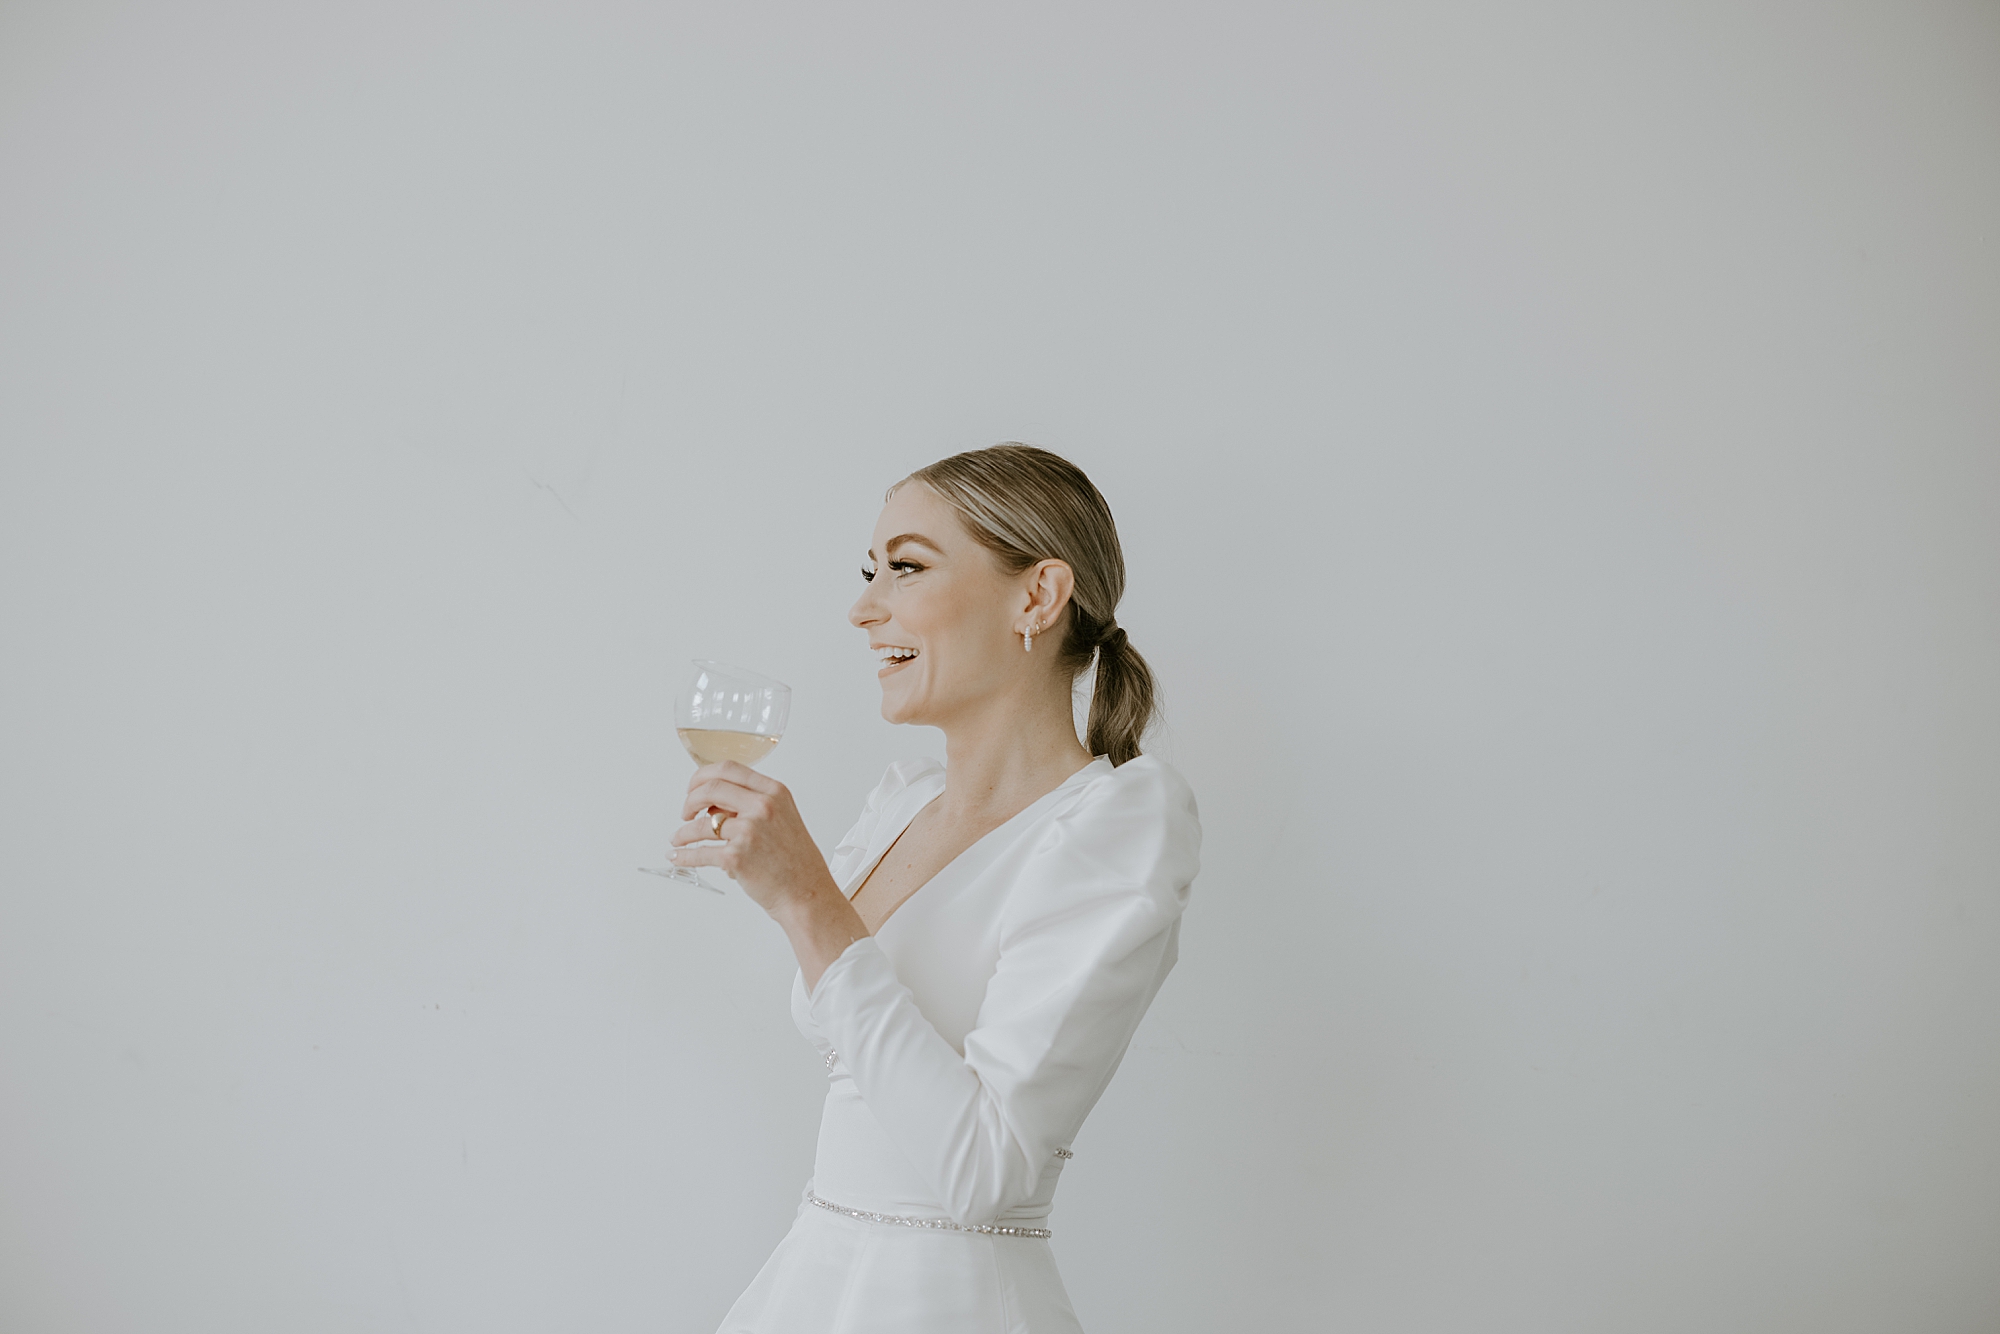 champagne toast photos